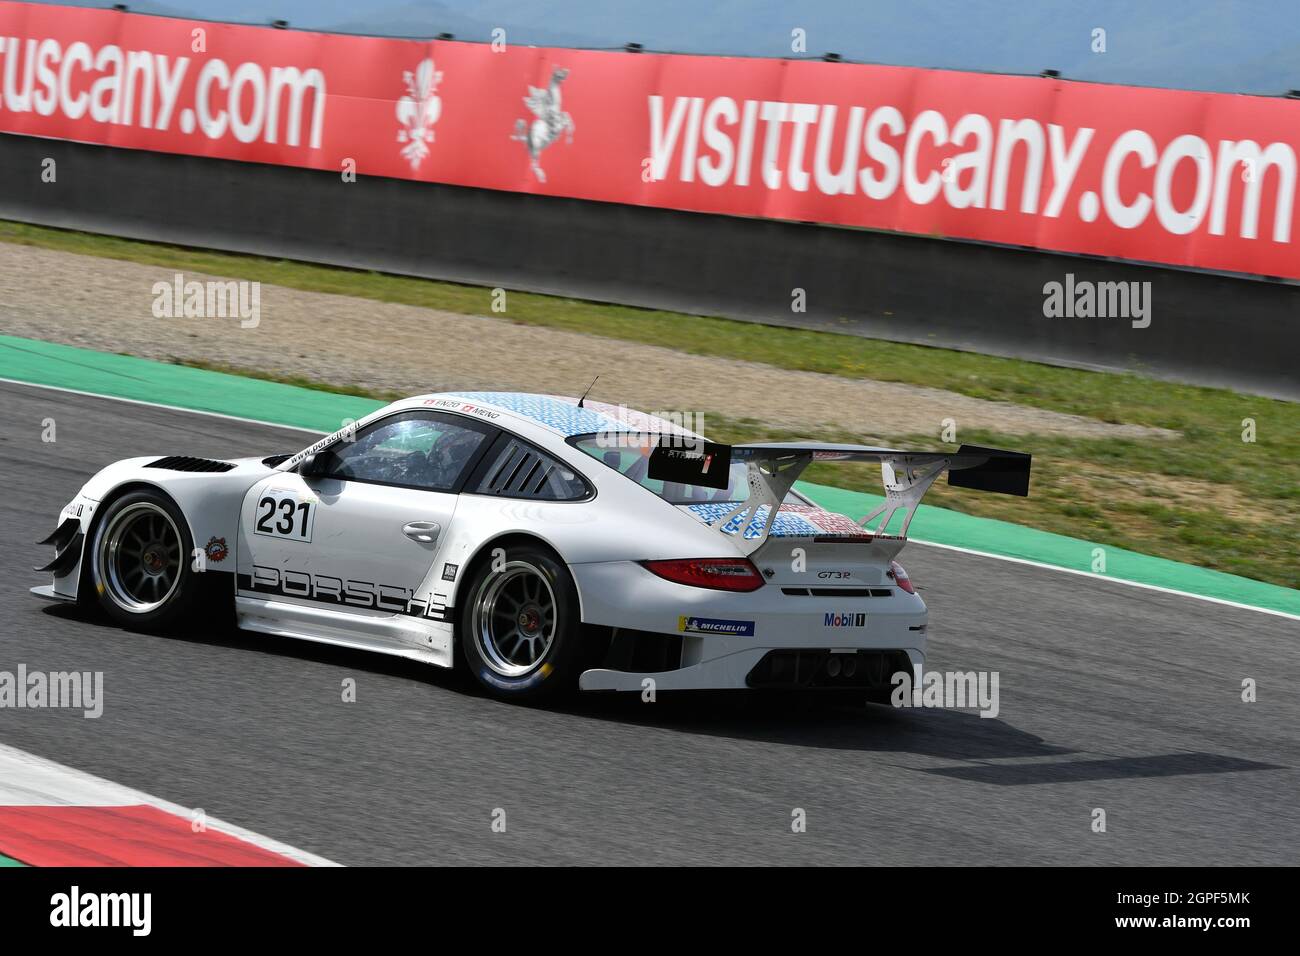 Mugello Circuit, Italy - 23 September 2021: Porsche 997 GT3 R in action at Mugello Circuit during Porsche Sports Cup Suisse event 2021 driven by unkno Stock Photo